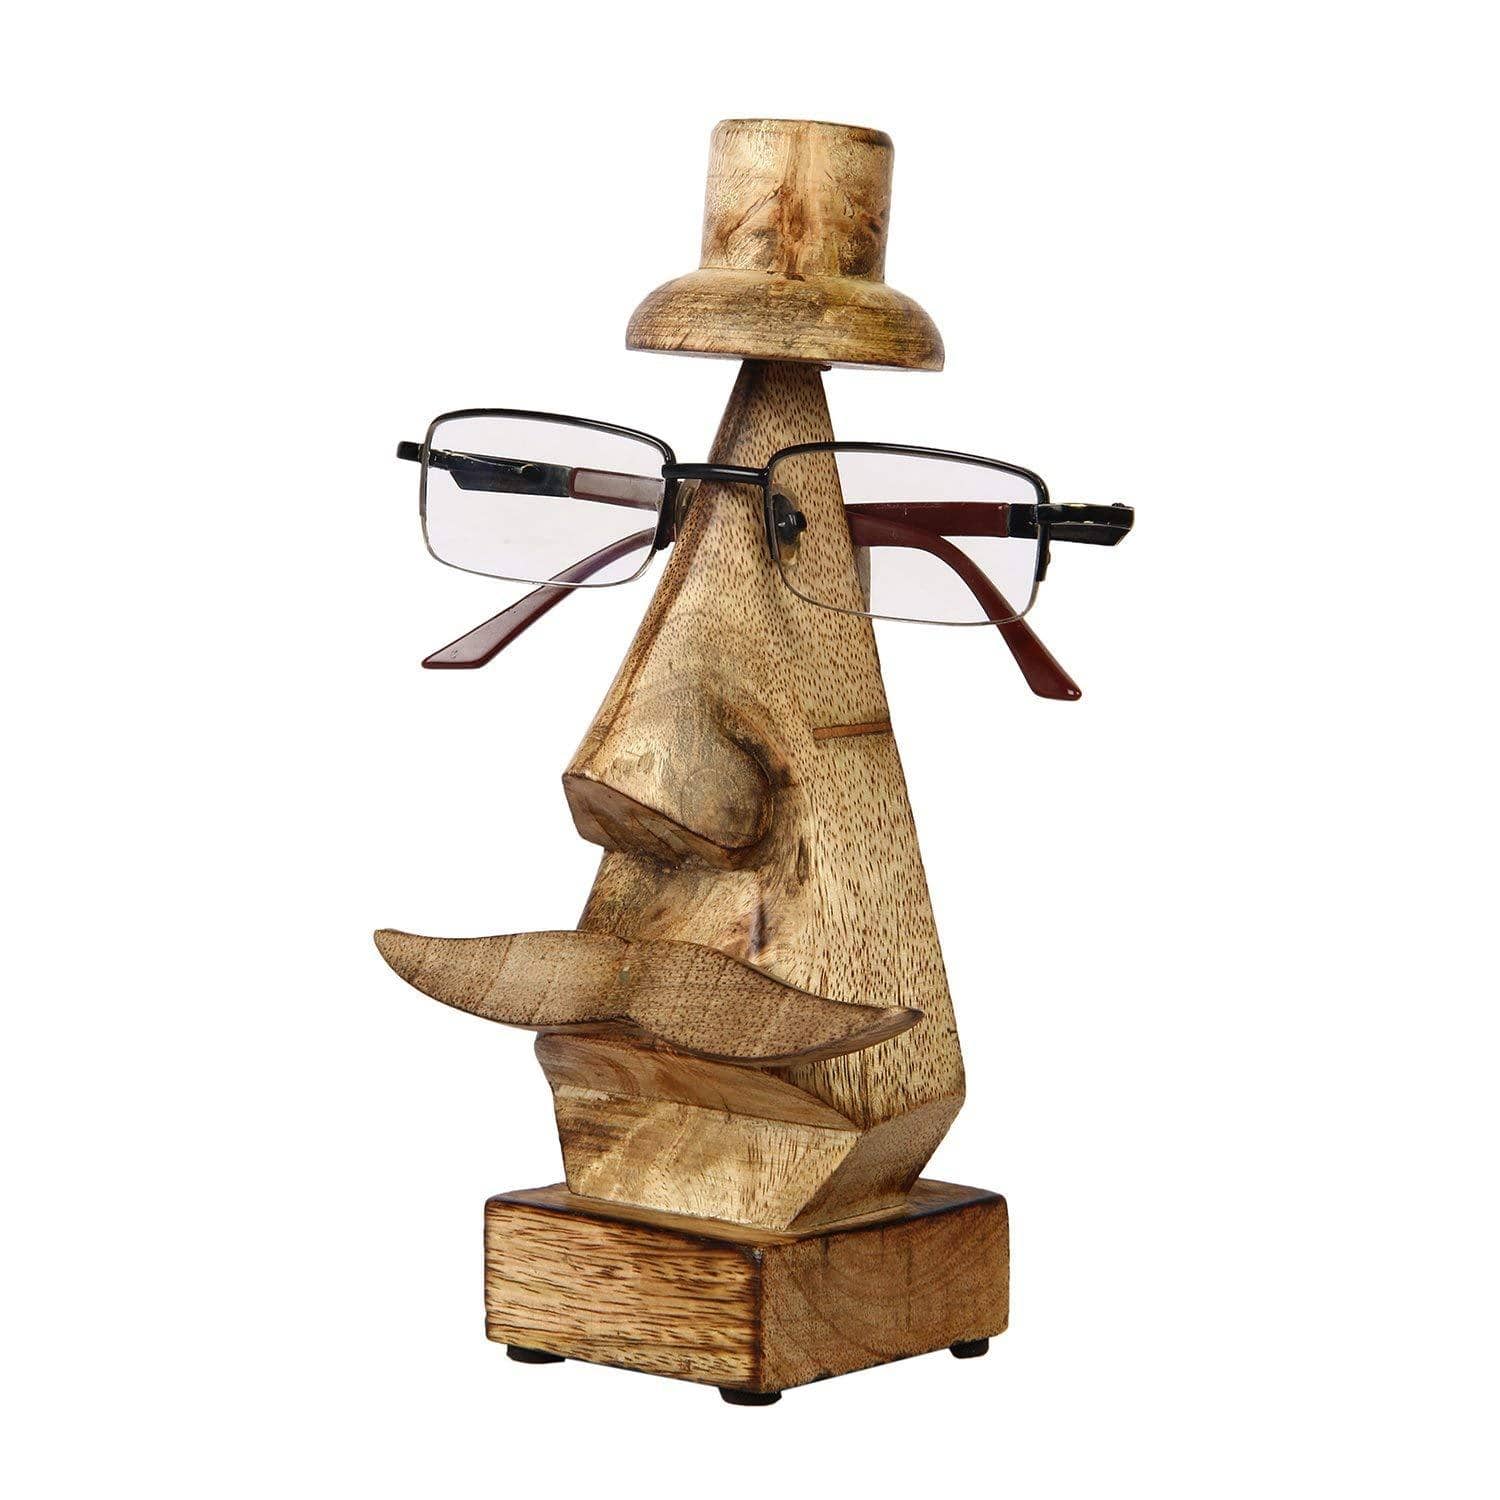 Wooden Hand Carved Eyeglass Nose Shaped Spectacle Holder